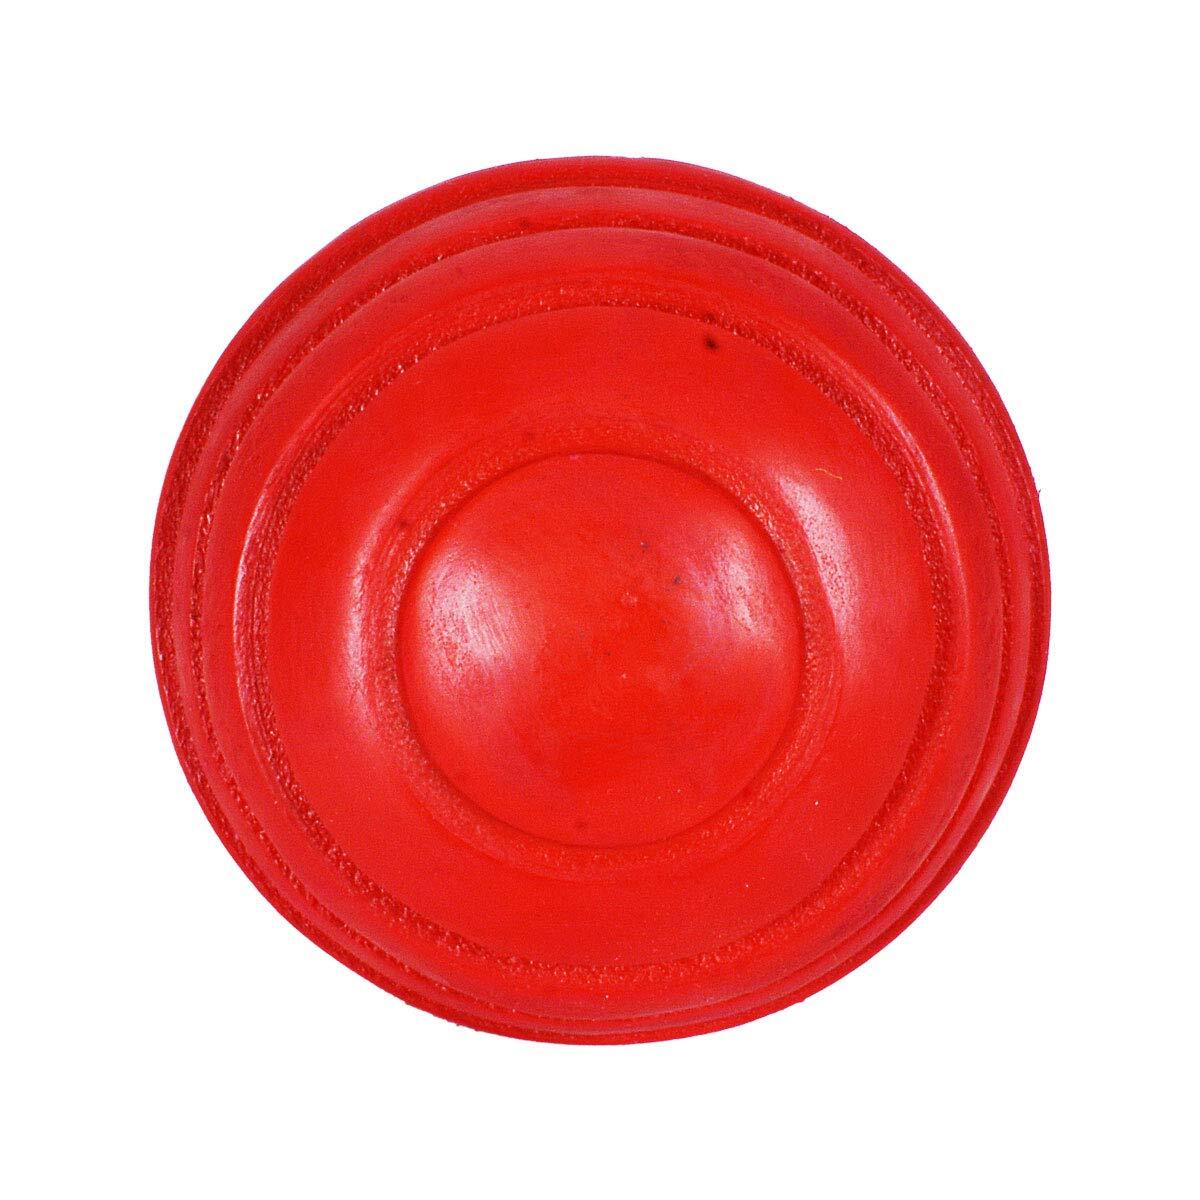 DSC Synthetic Wobble Leather Cricket Ball 2/5